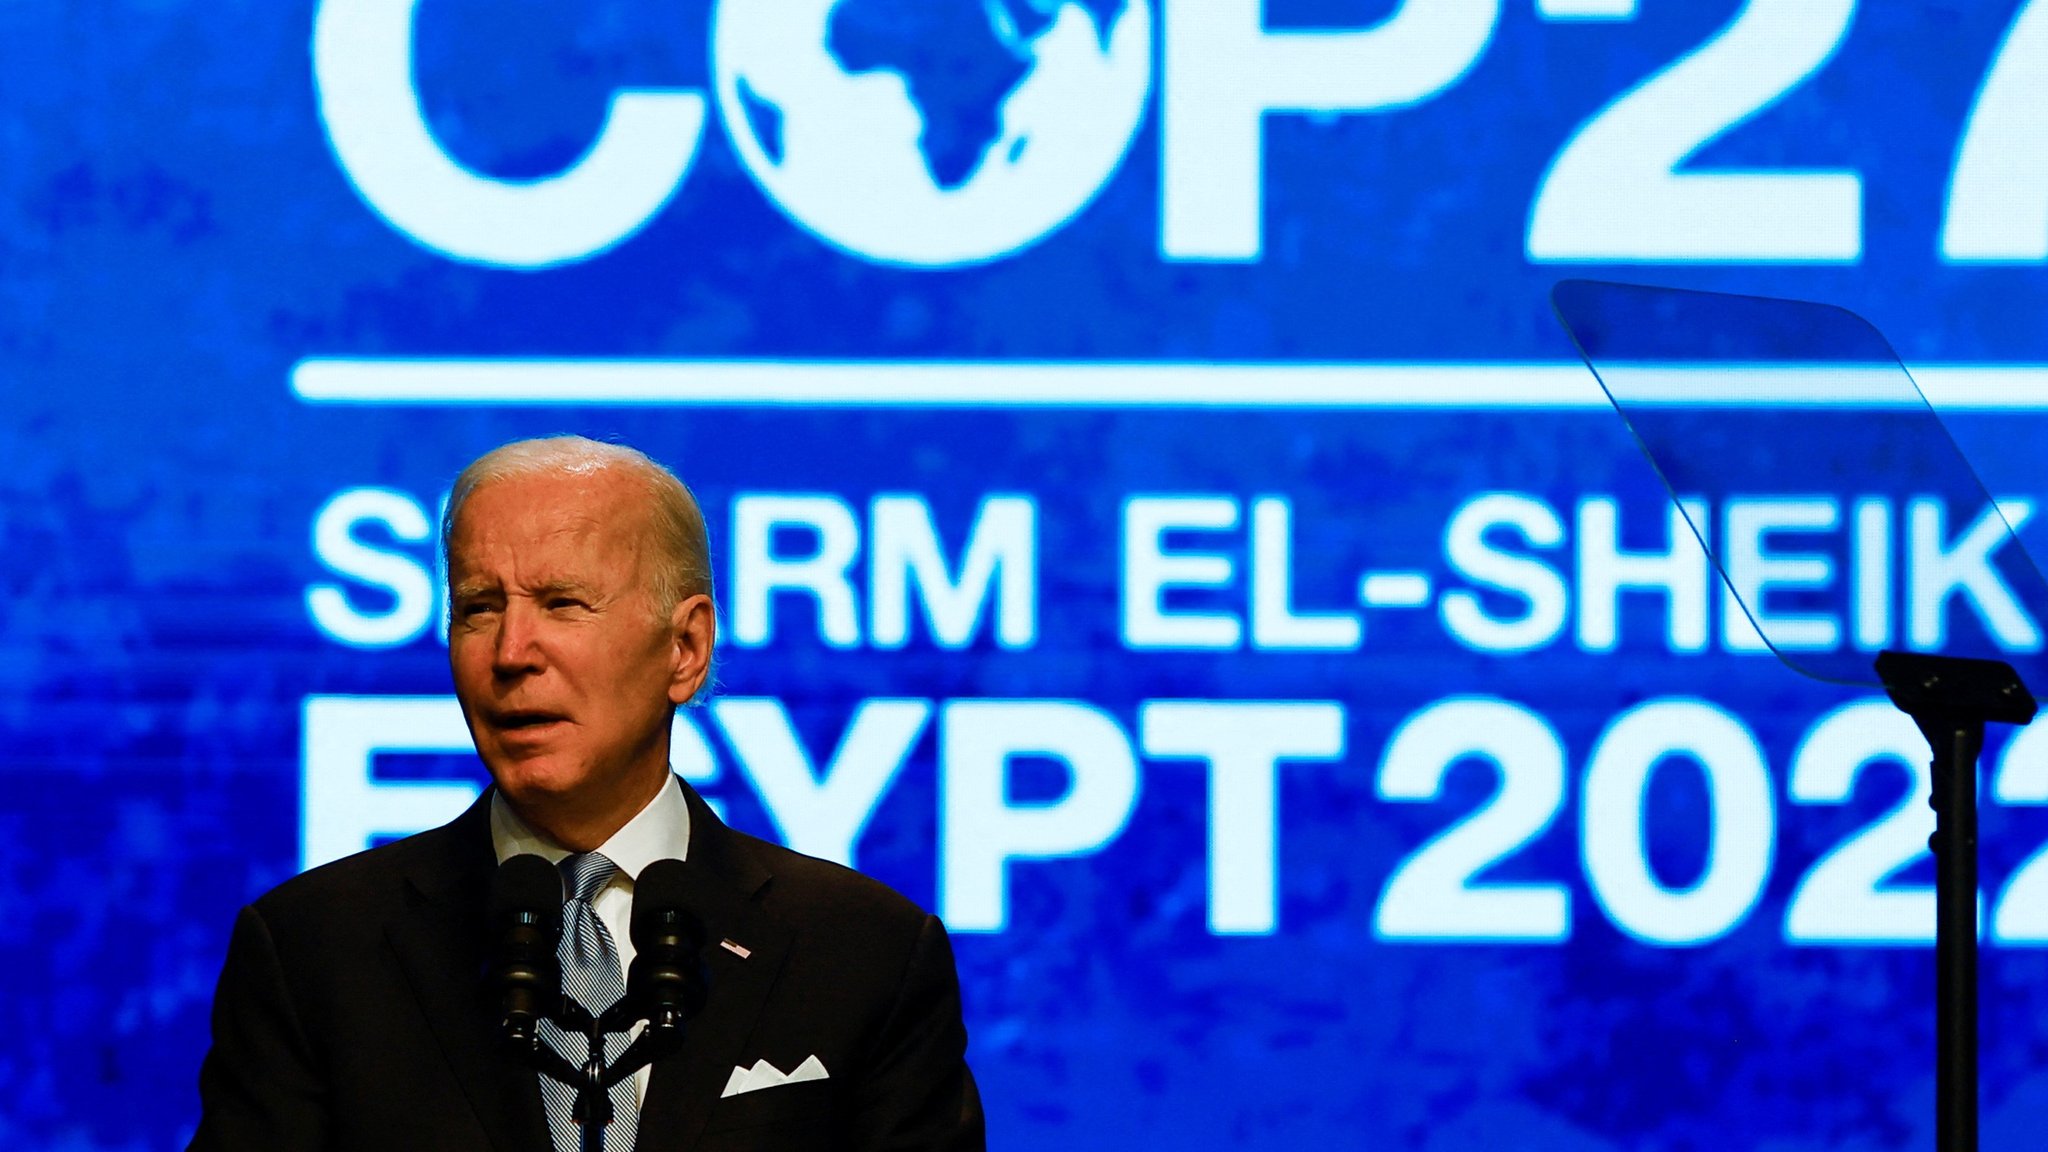 Climate crisis about the life of this planet, Biden tells summit